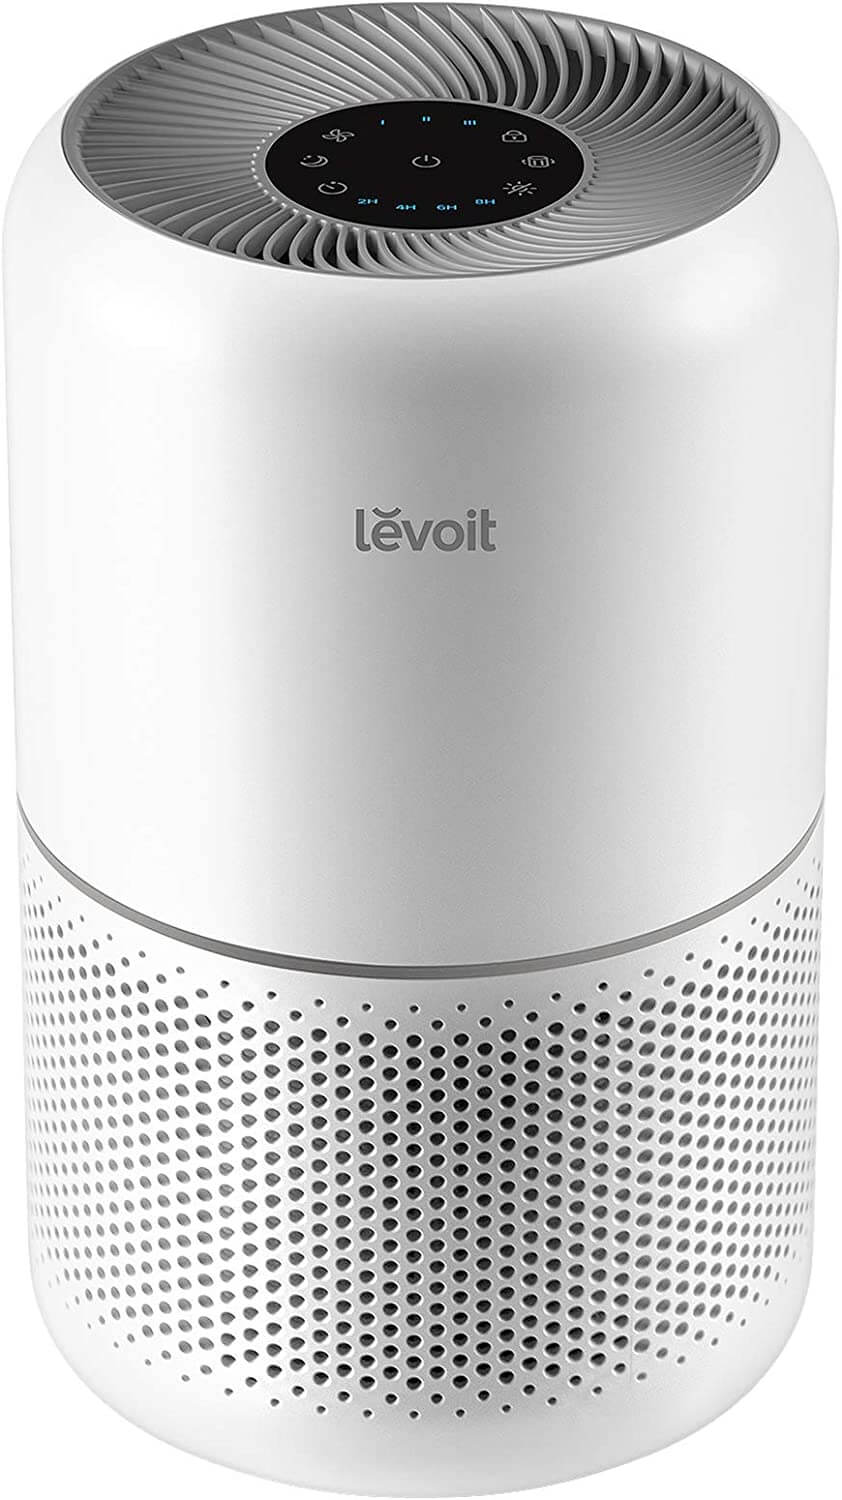 Levoit Air Purifier for Home Pets